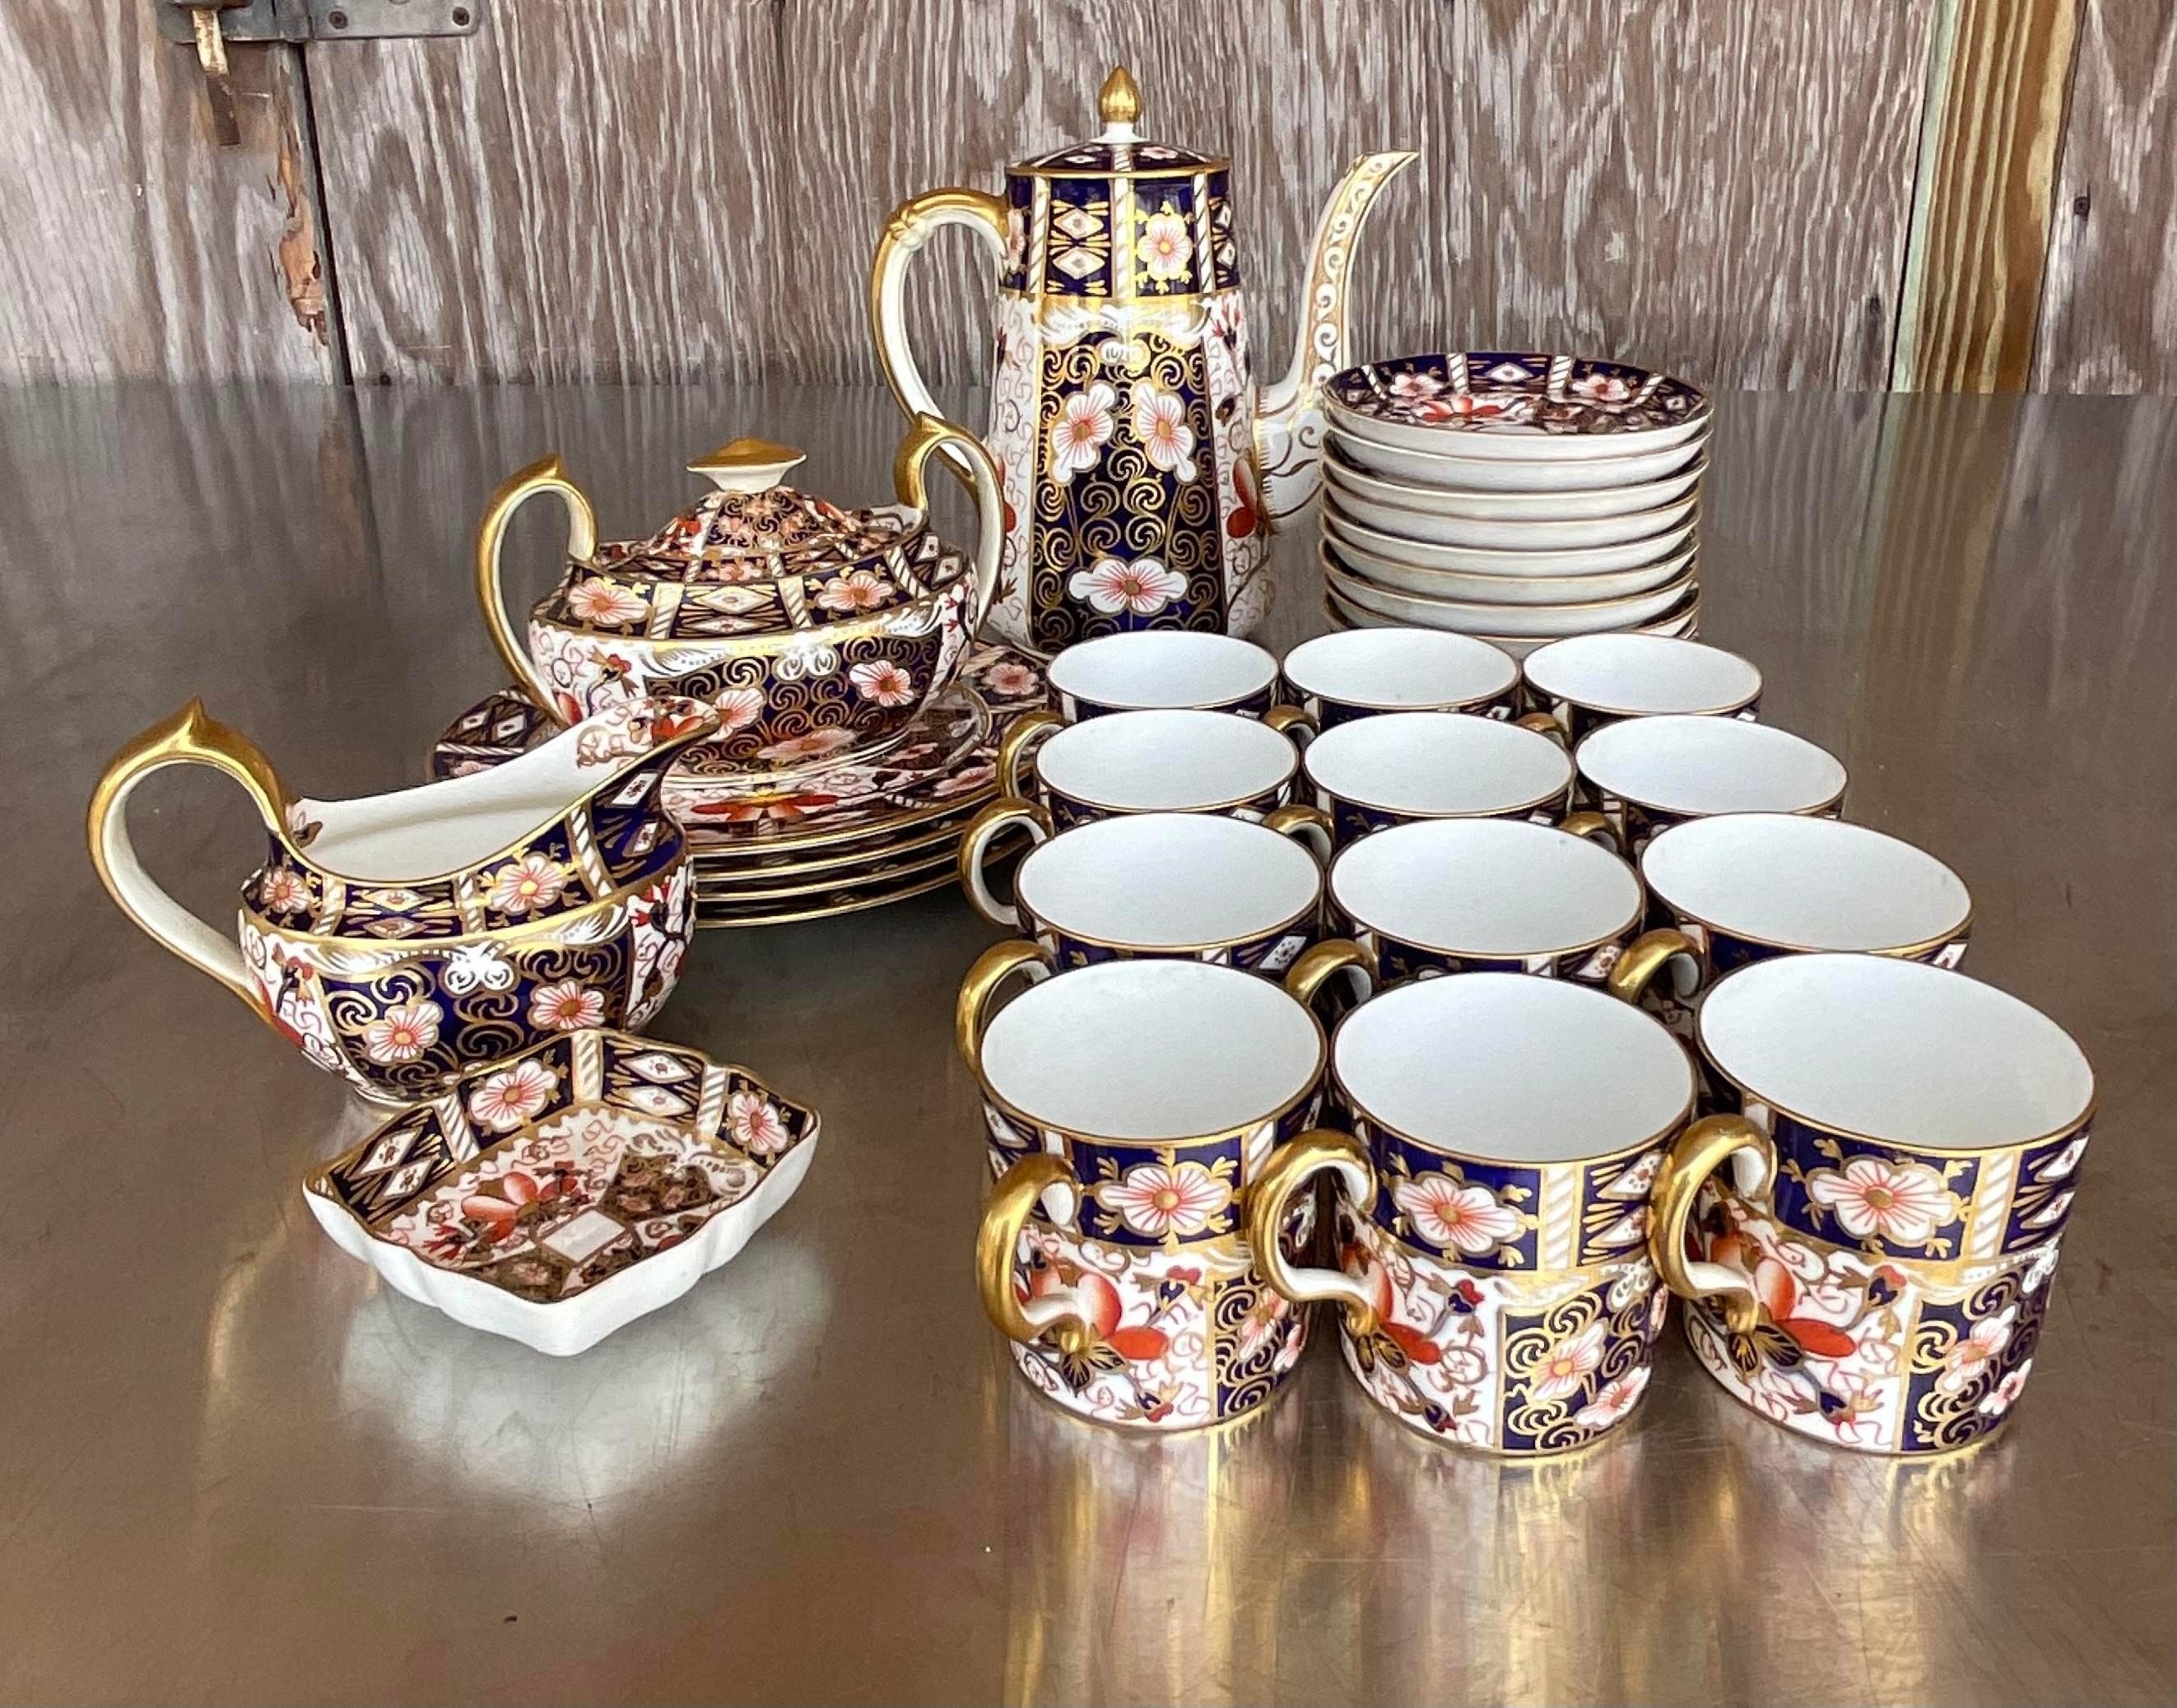 A fantastic vintage Regency coffee and tea service. Made by the iconic Royal Crown Derby group. The traditional Imari 2451 style with 32 pieces total. The set includes two different stamps- some have the classic RCD logo and Some are stamped RCD